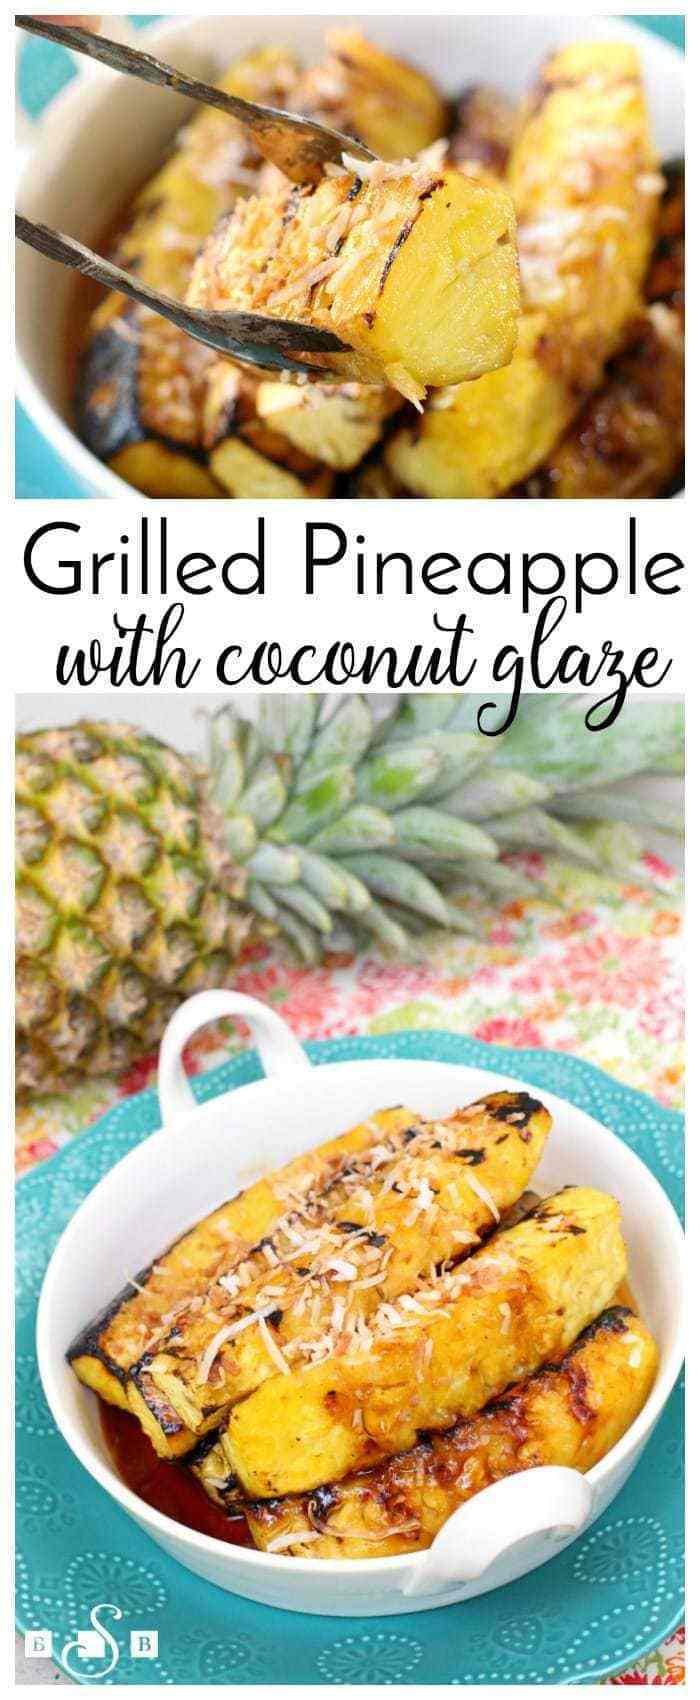 Grilled Pineapple with Coconut Cream Glaze only takes 4 ingredients, is healthy, and is delicious. Using a pineapple, cream of coconut, coconut flakes, and a touch of brown sugar, the only hard part is knowing how to cut a pineapple! #grilledpineapple #coconutglaze #howtocutapineapple #coconutcream #creamofcoconut #recipefrom Butter With a Side of Bread